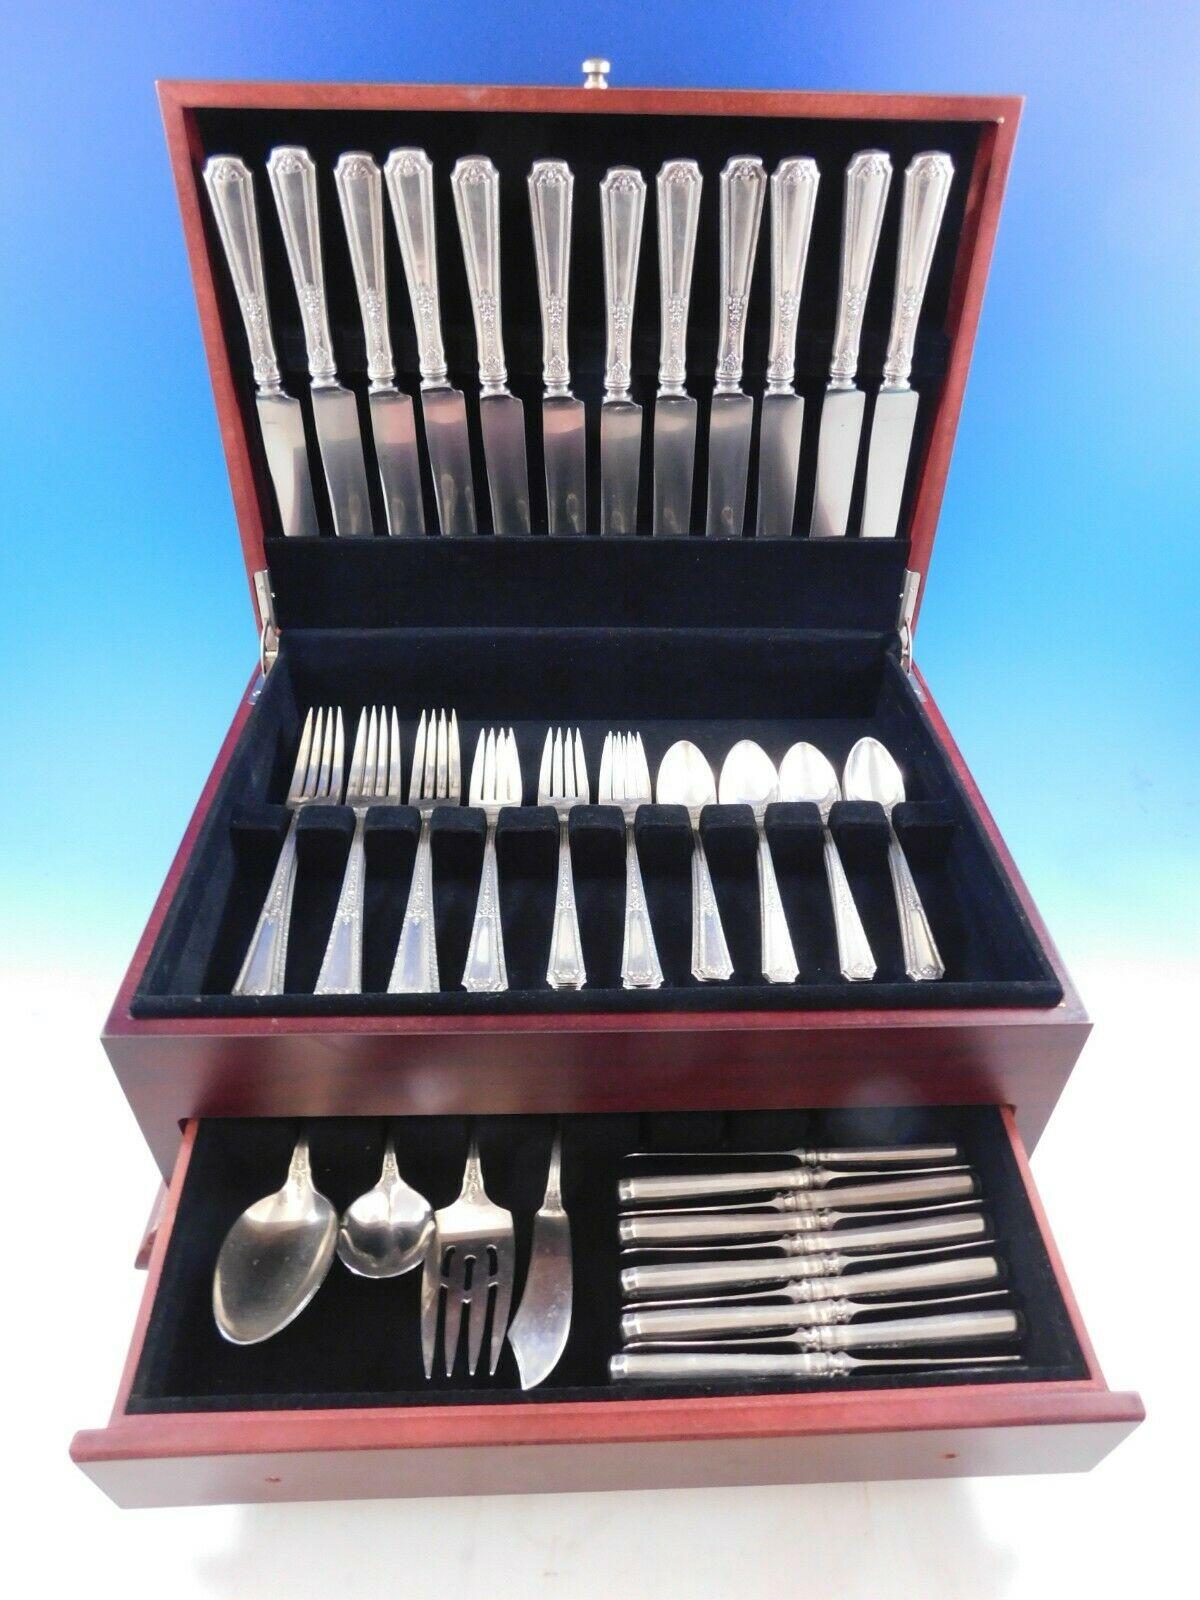 Celebrate all of your meals in style with this Louis XIV by Towle sterling silver flatware set. Founded in 1690 in Massachusetts, the elite artisans at Towle Silversmiths handcrafted exquisite sterling silver with exceptional quality balanced with